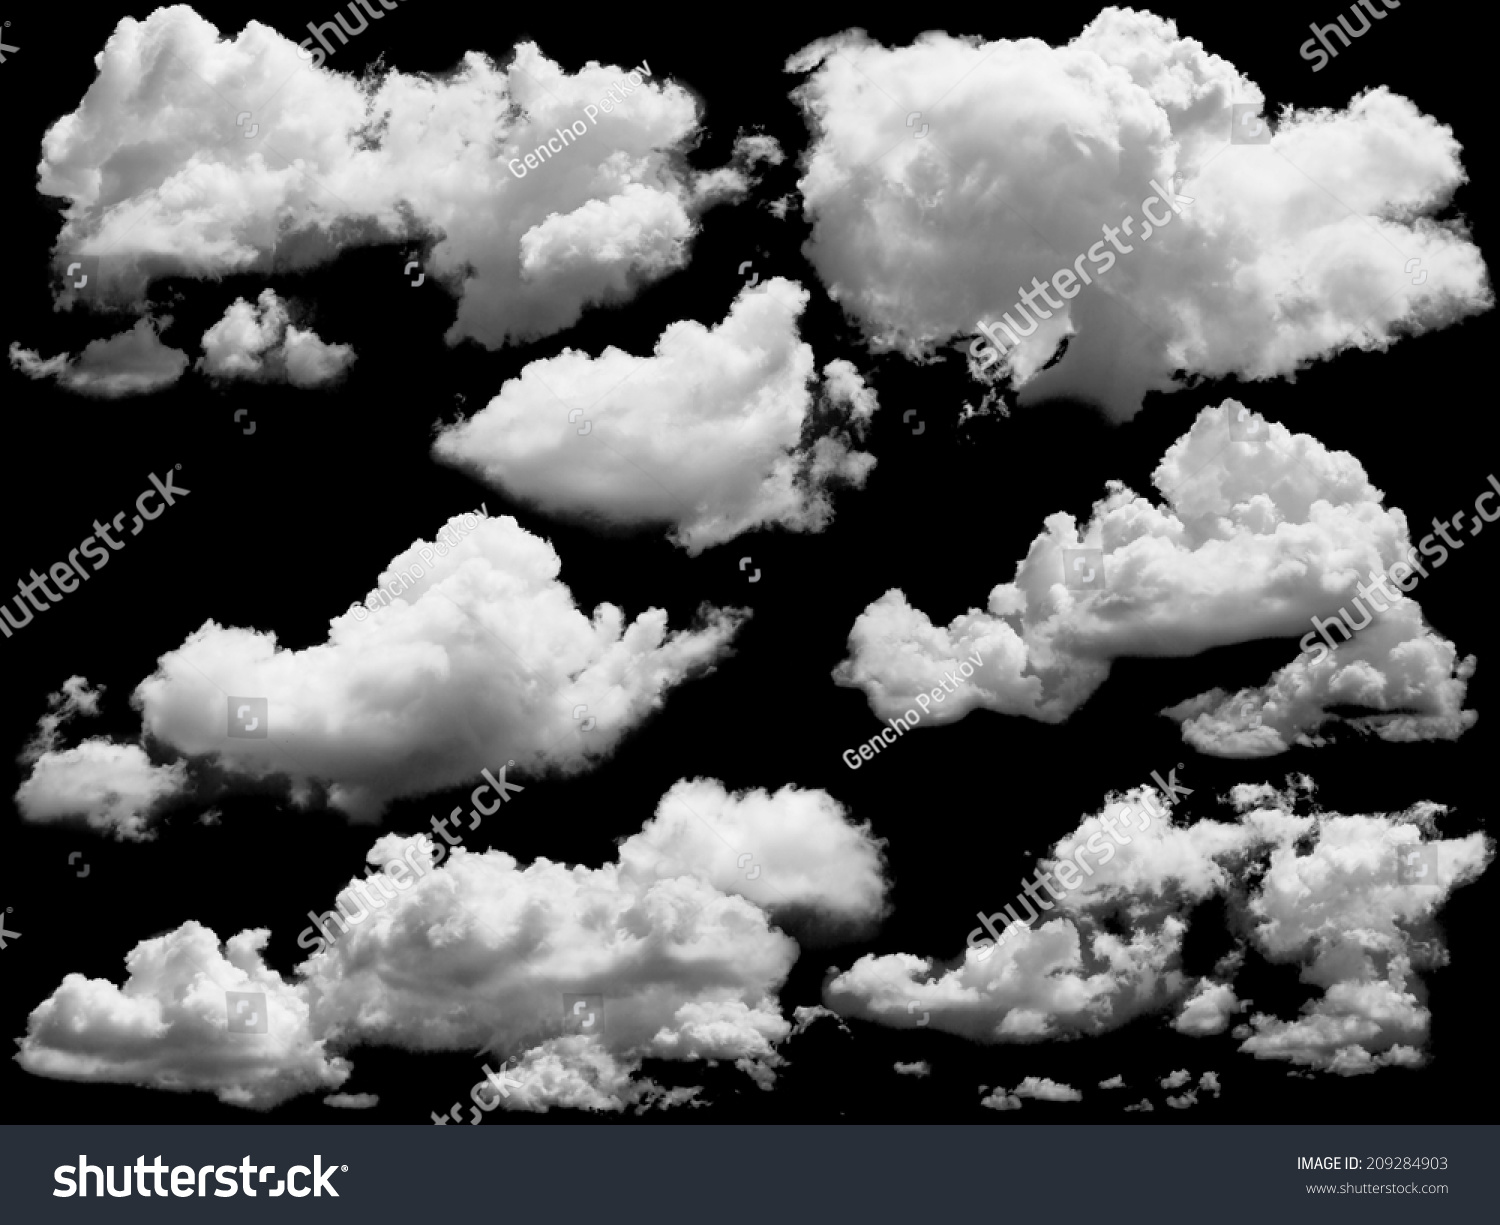 Set of isolated clouds over black. Design elements  #209284903